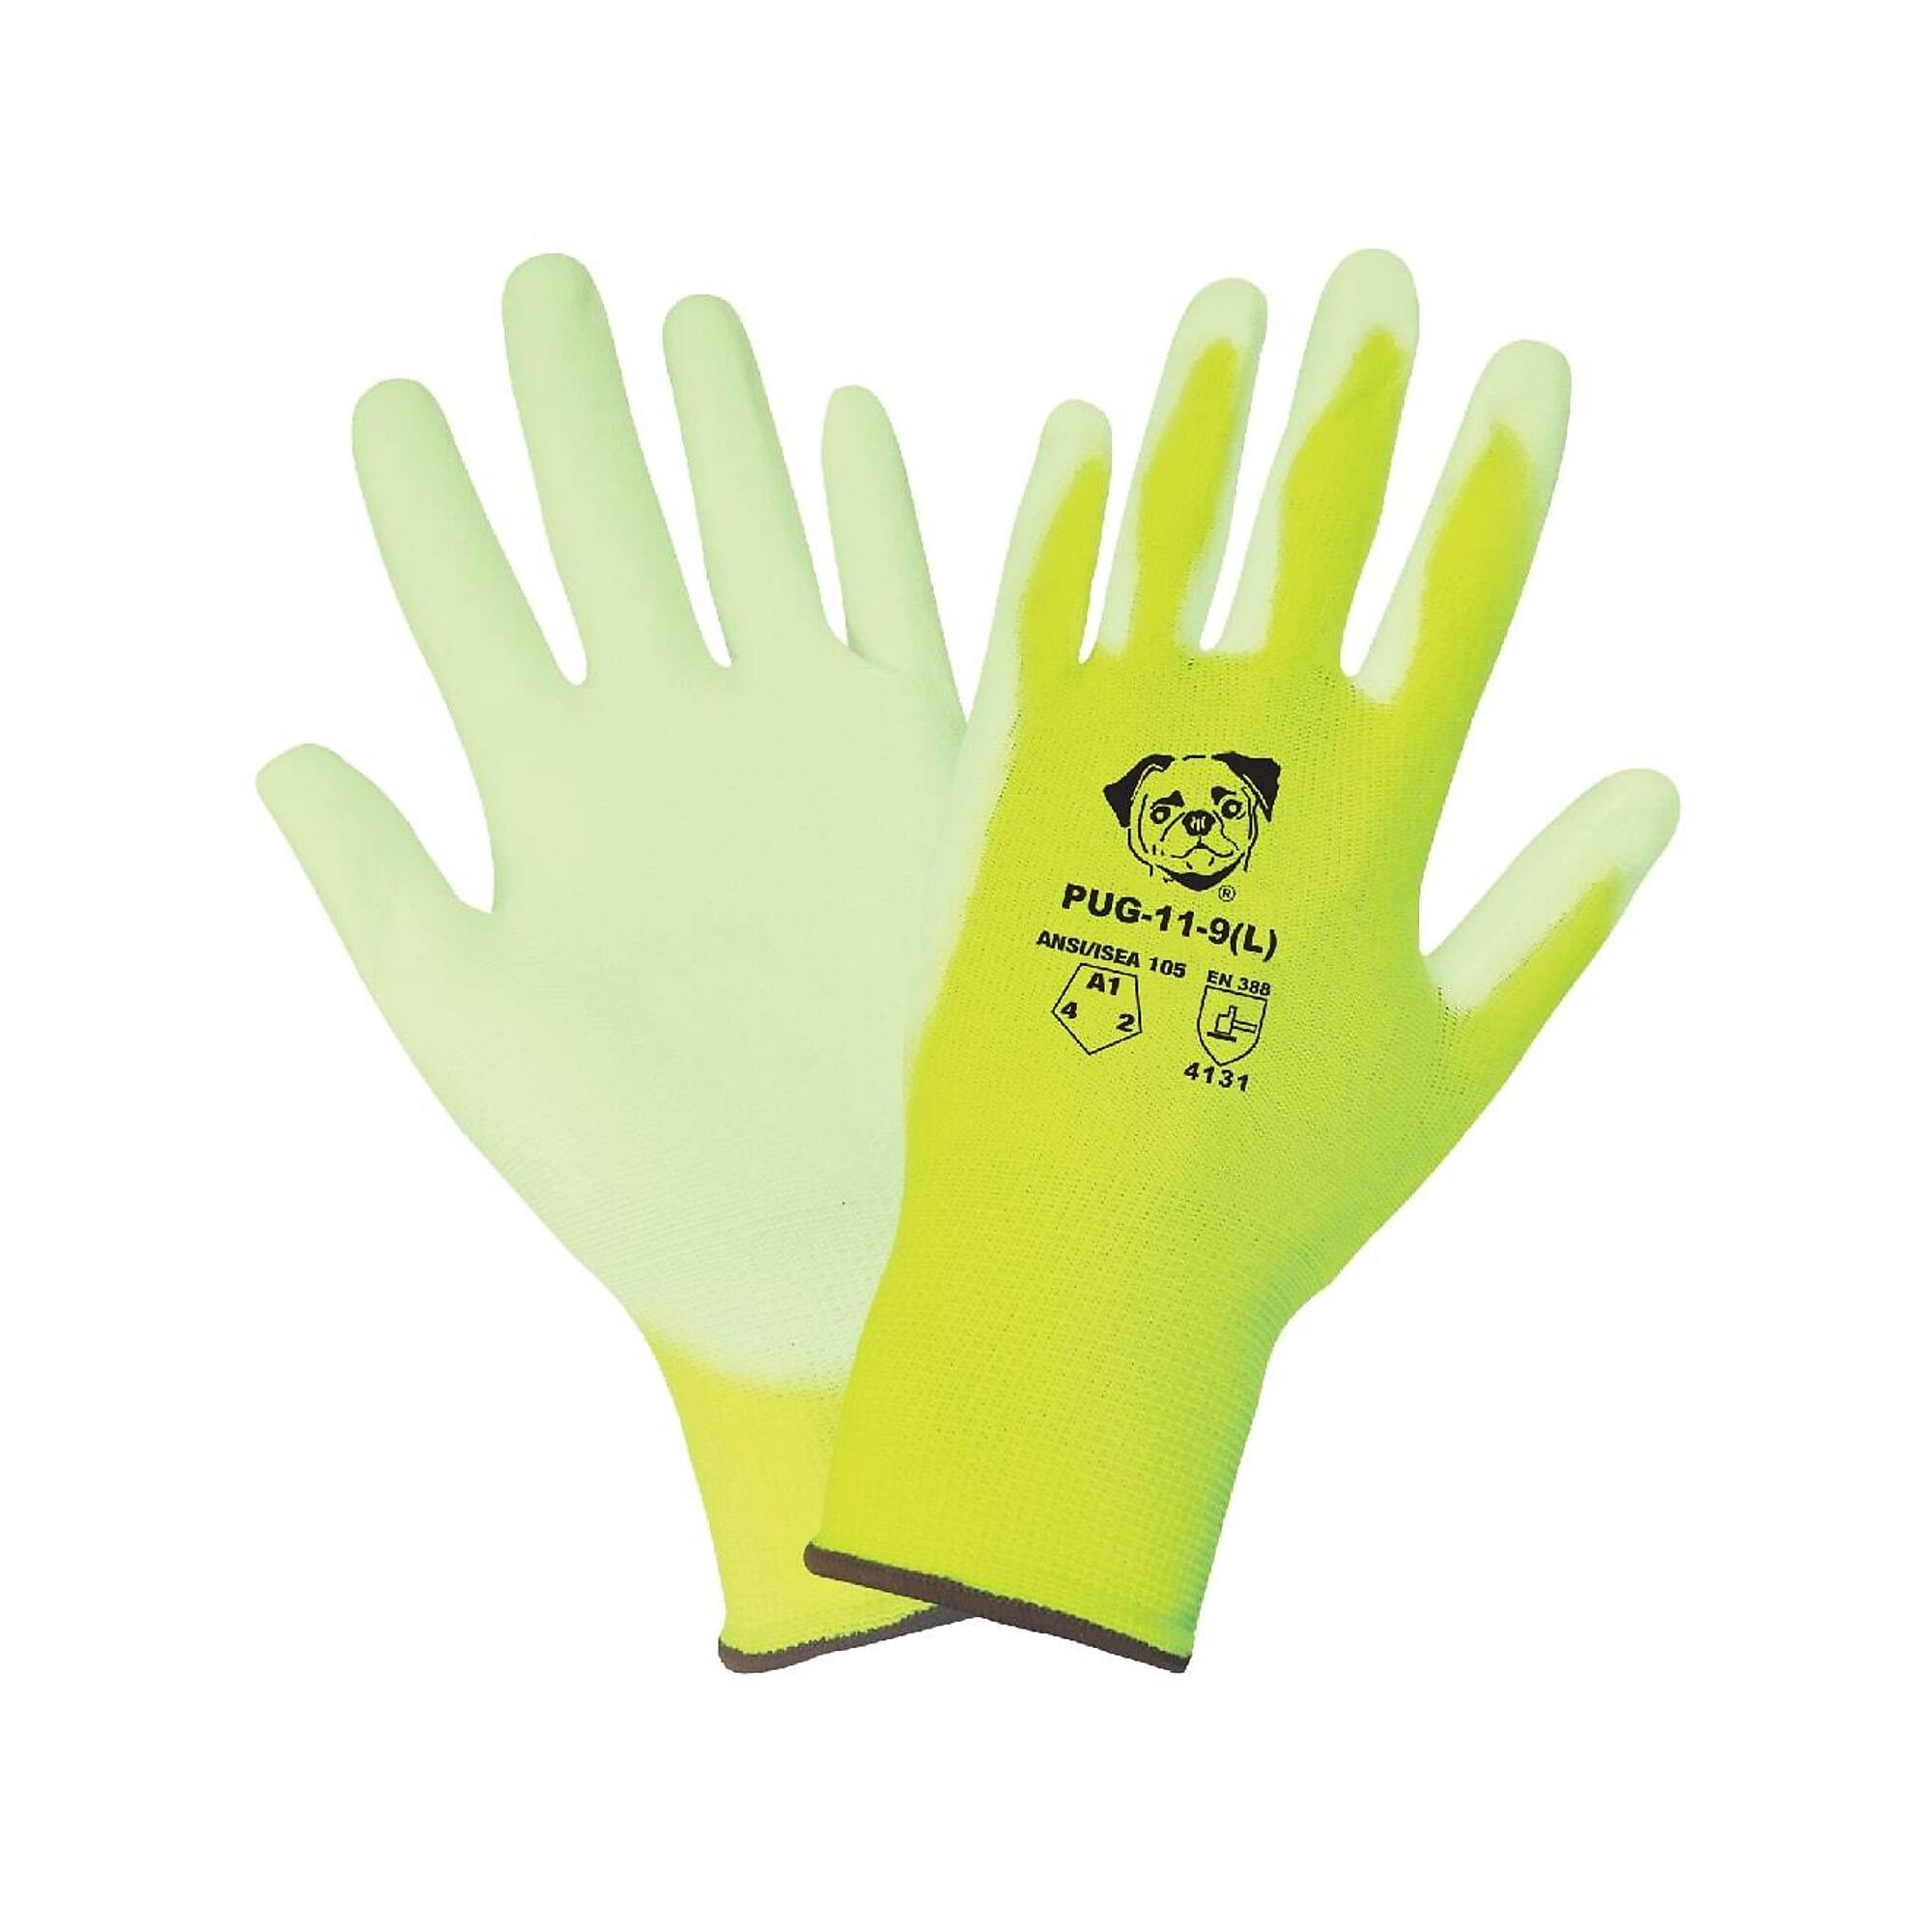 Global Glove PUG , HV Y/G, Poly Coated, Cut Resistant A1 Gloves - 12 Pairs, Size M, Color High-Visibility Yellow/Green, Included (qty.) 12 Model PUG-